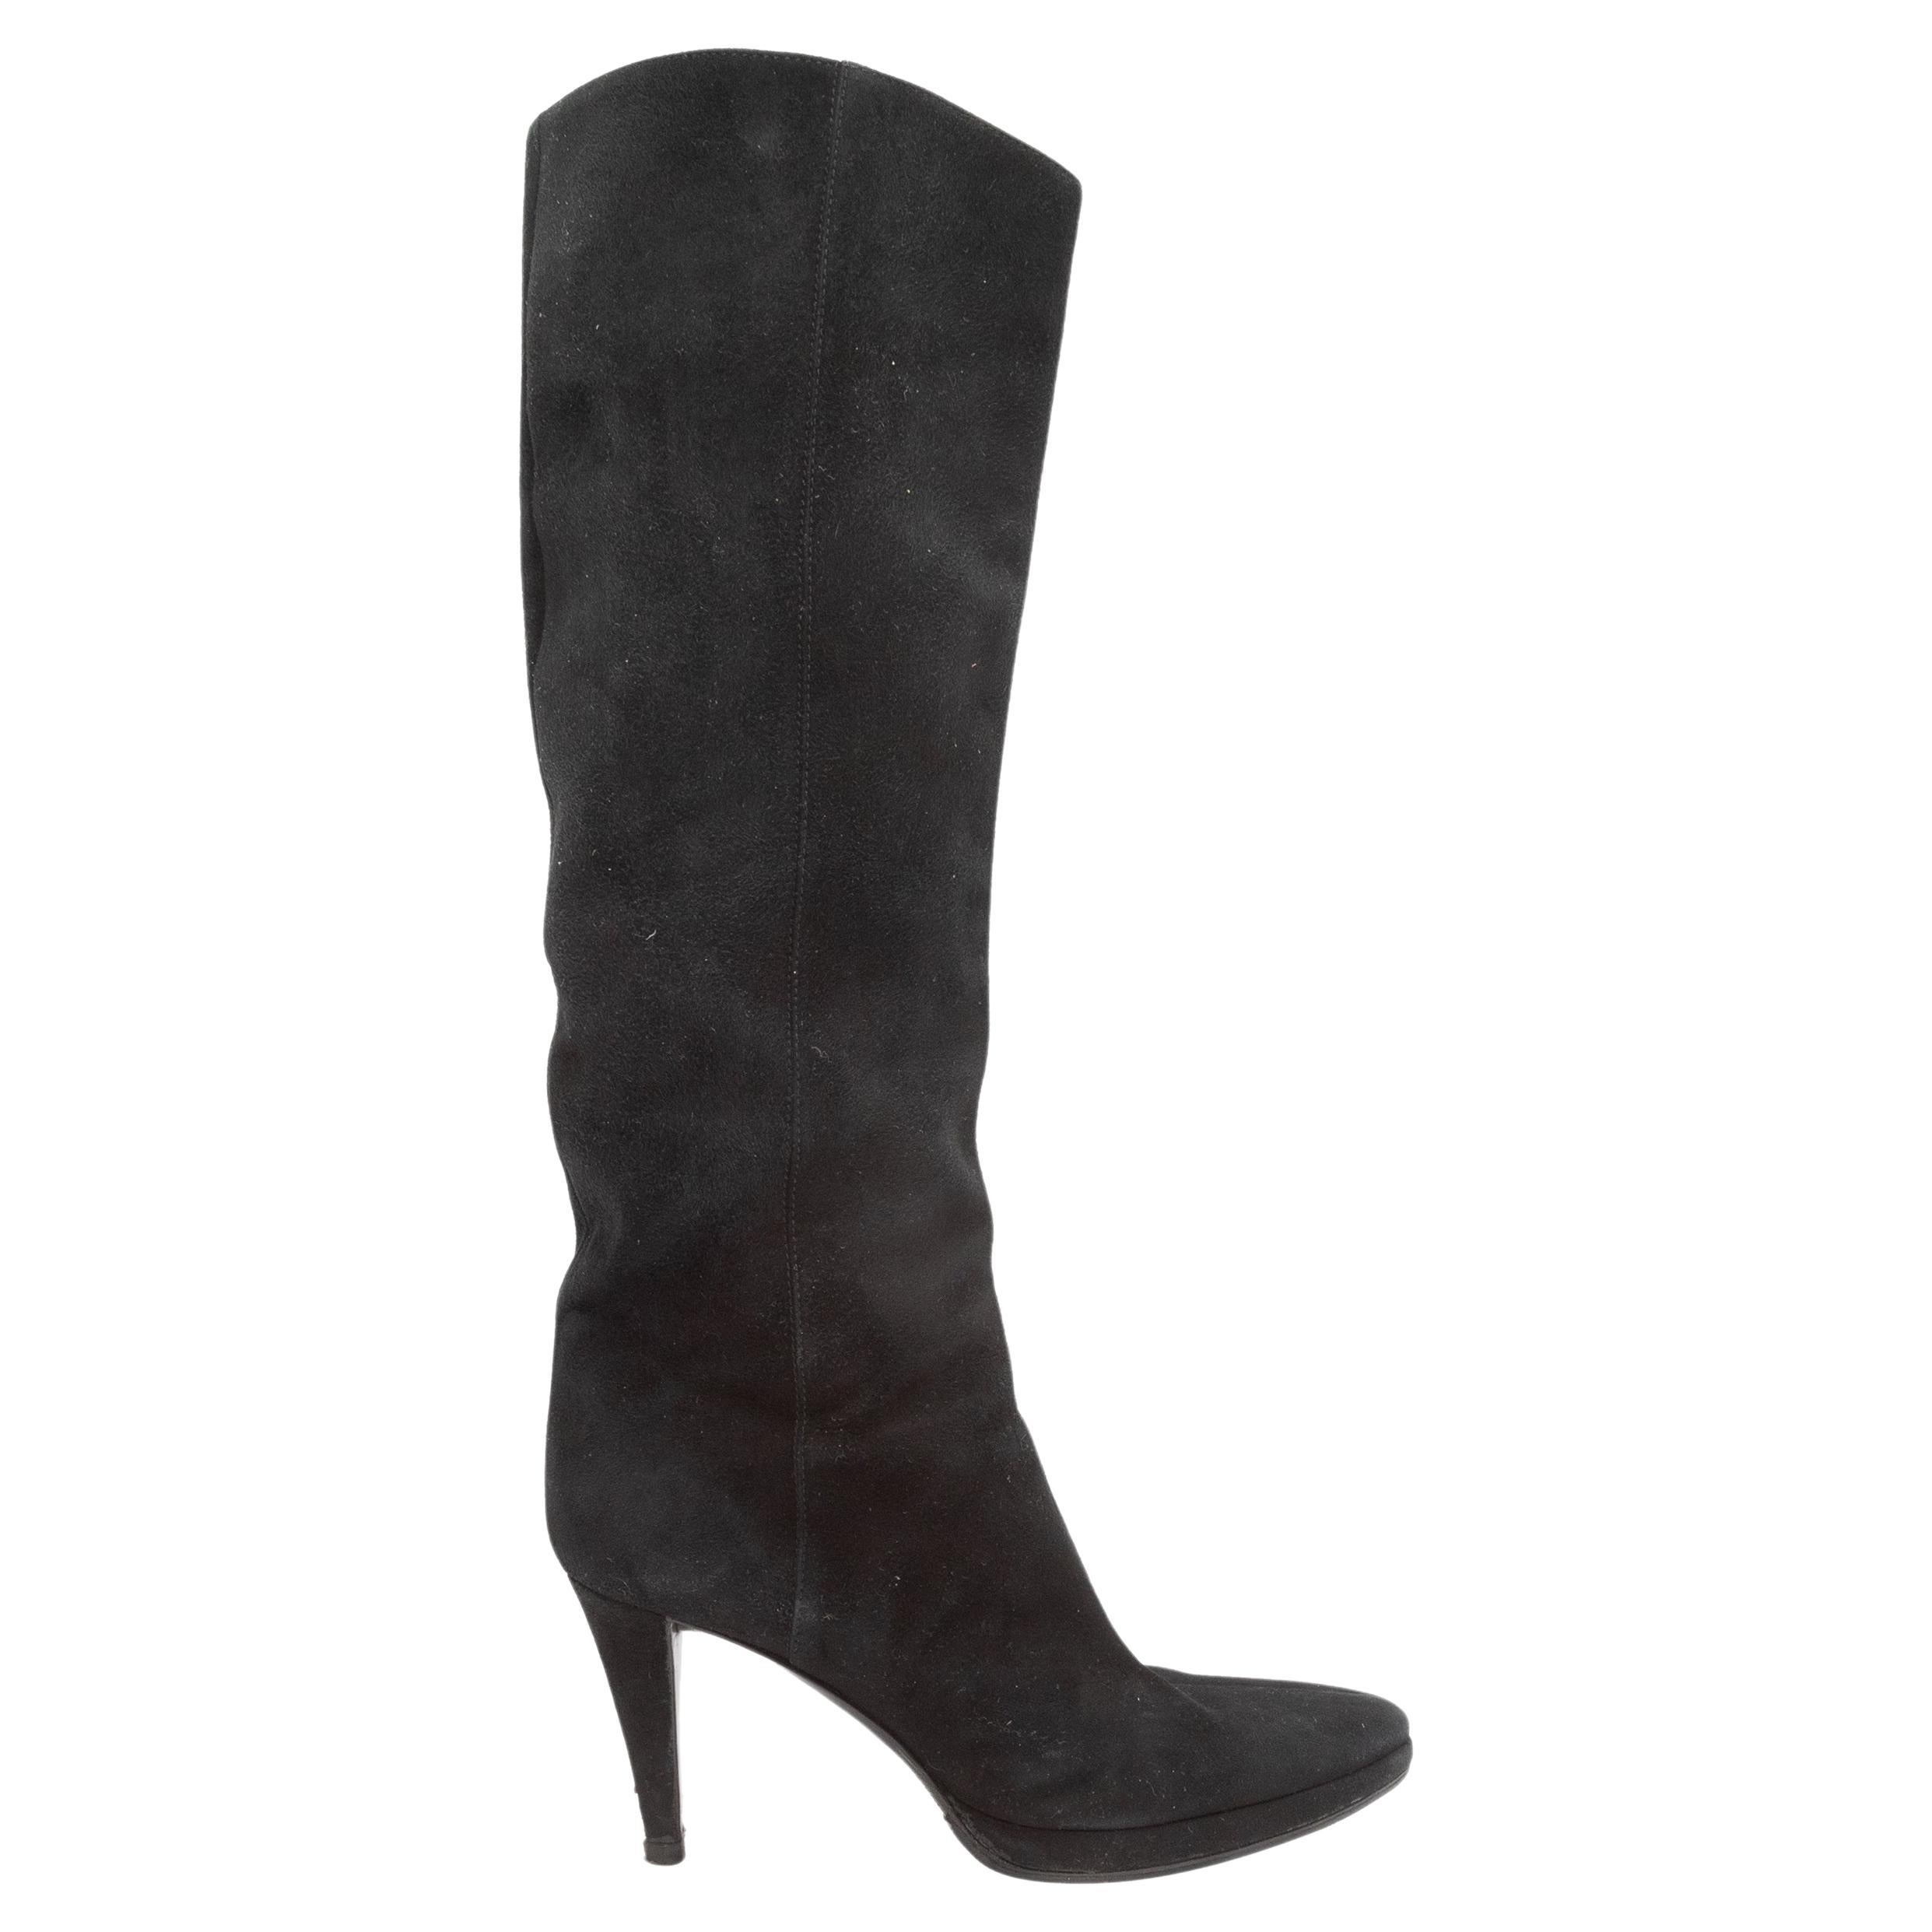 Black Sergio Rossi Suede Pointed-Toe Knee-High Boots